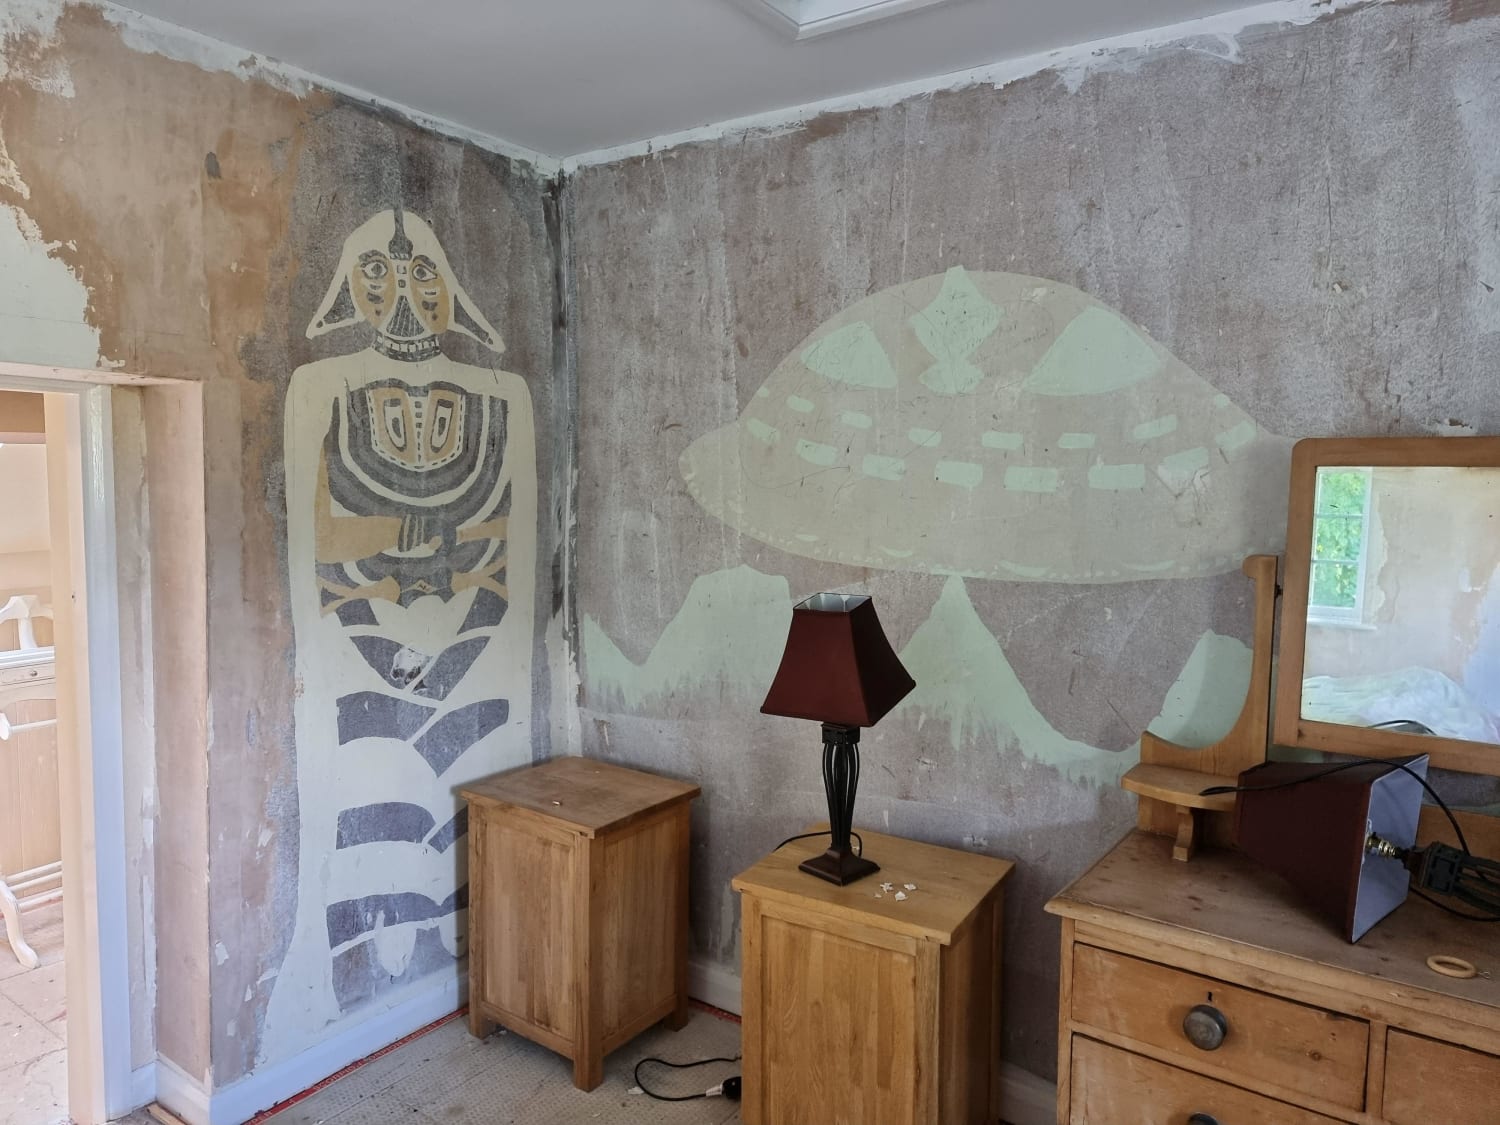 A strange mural found after removing the paint in my aunt's new house